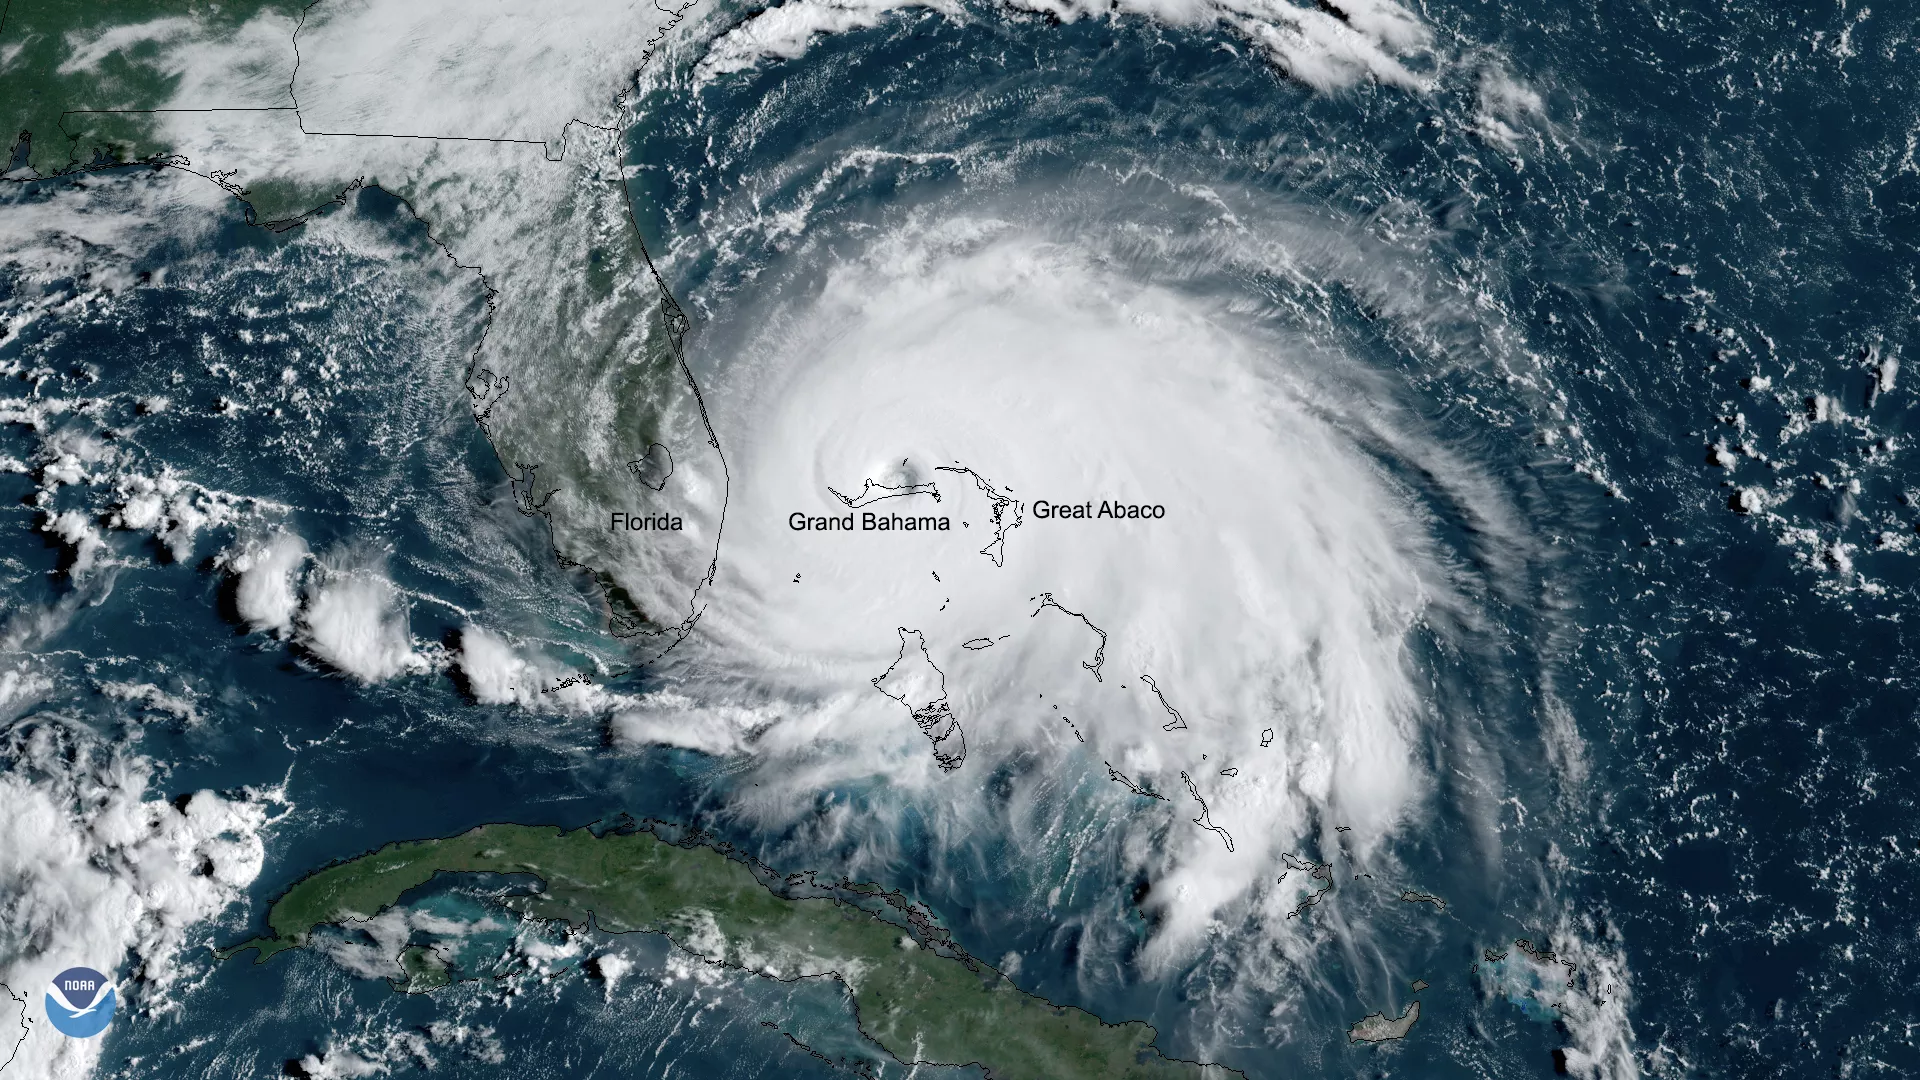 Image of Hurricane Dorian from space